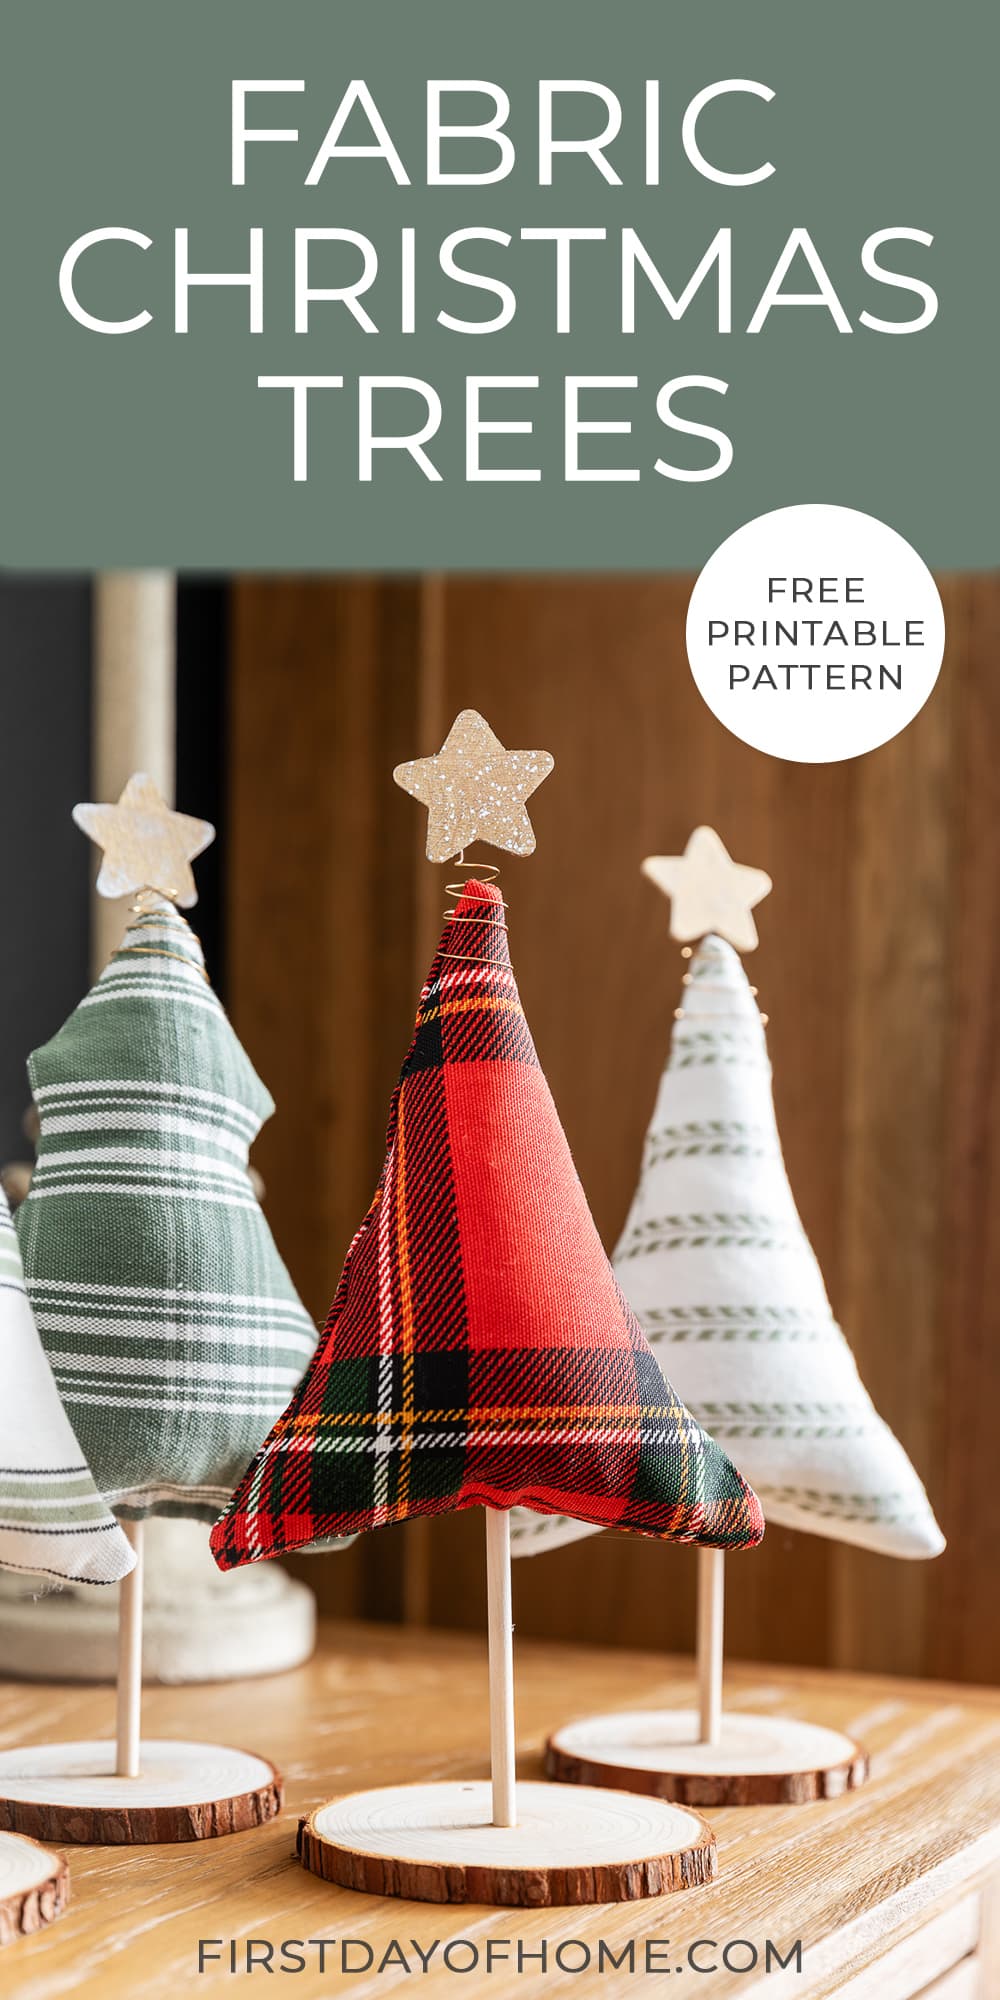 Group of fabric Christmas trees on wood slice stands with star tree toppers. Text overlay reads "Fabric Christmas Trees (Free Printable Pattern)".